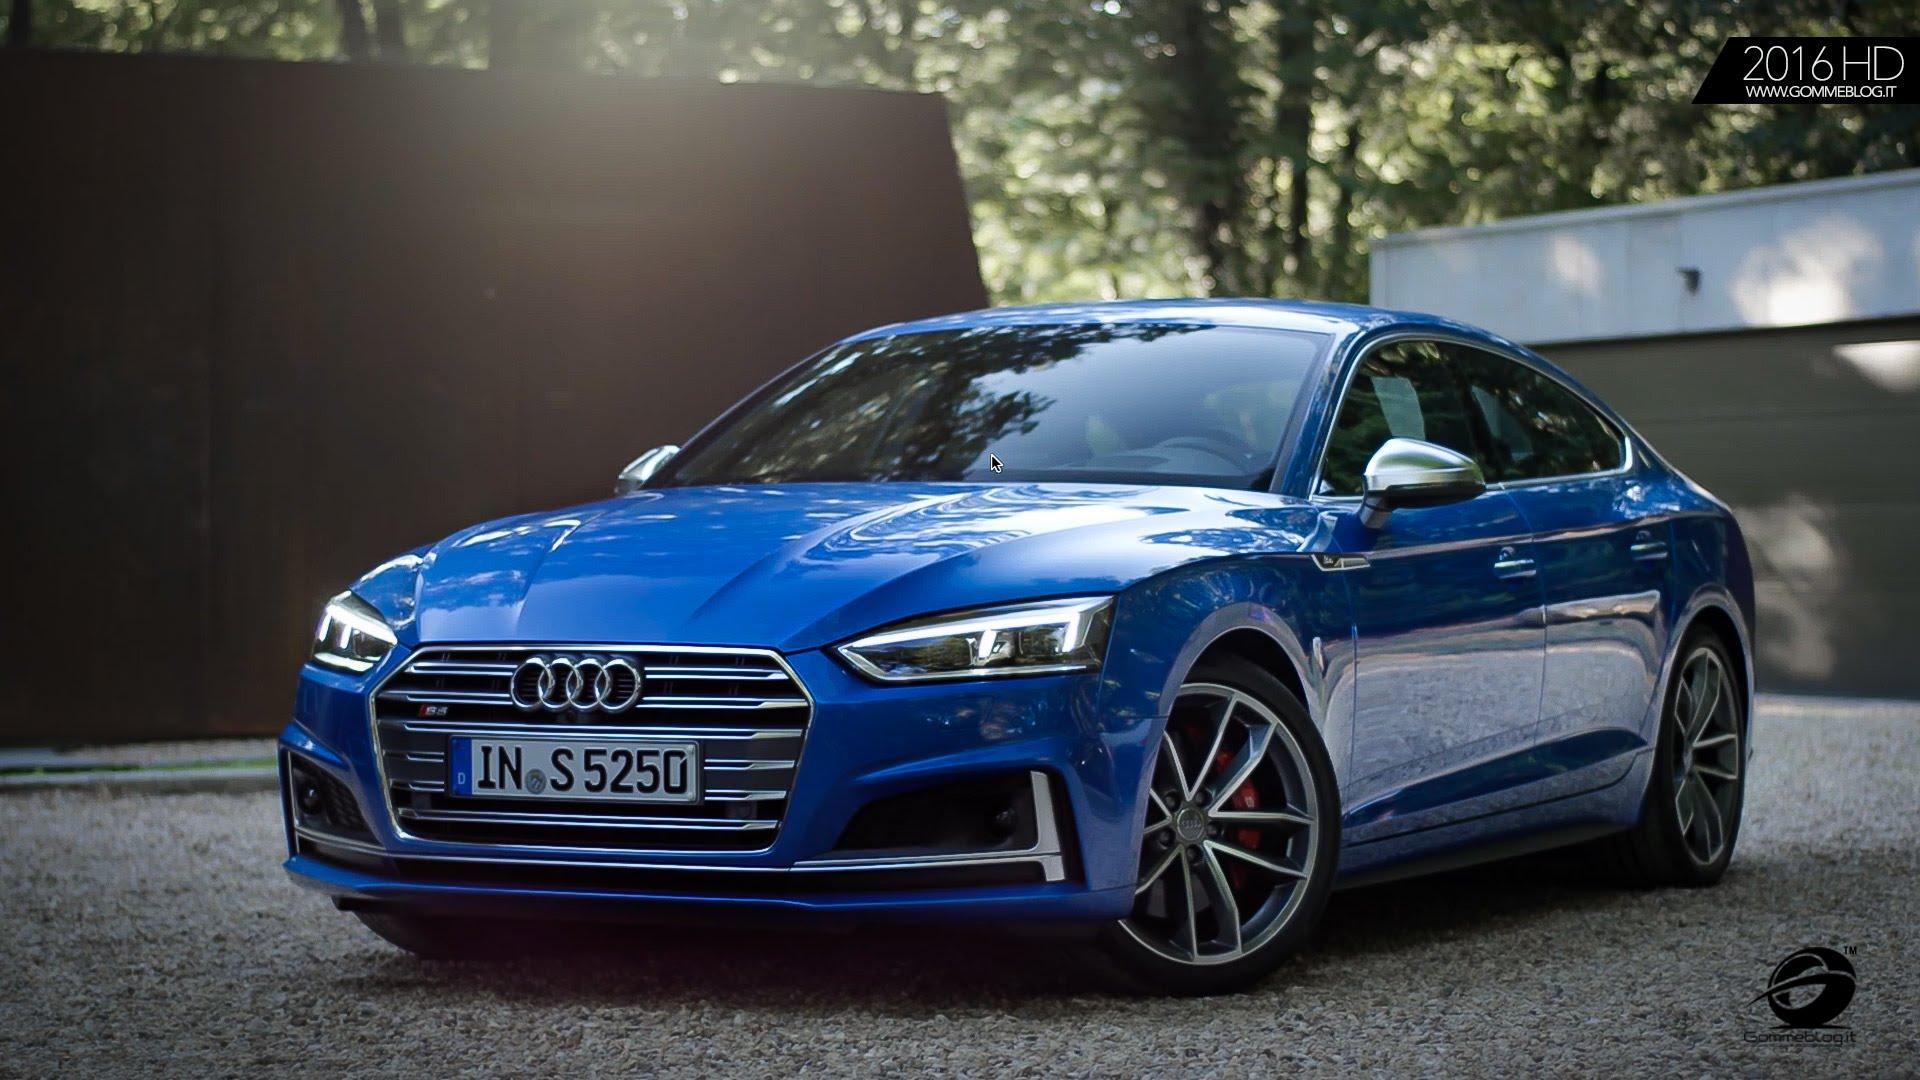 Audi S5 Wallpaper HD Photo, Wallpaper and other Image